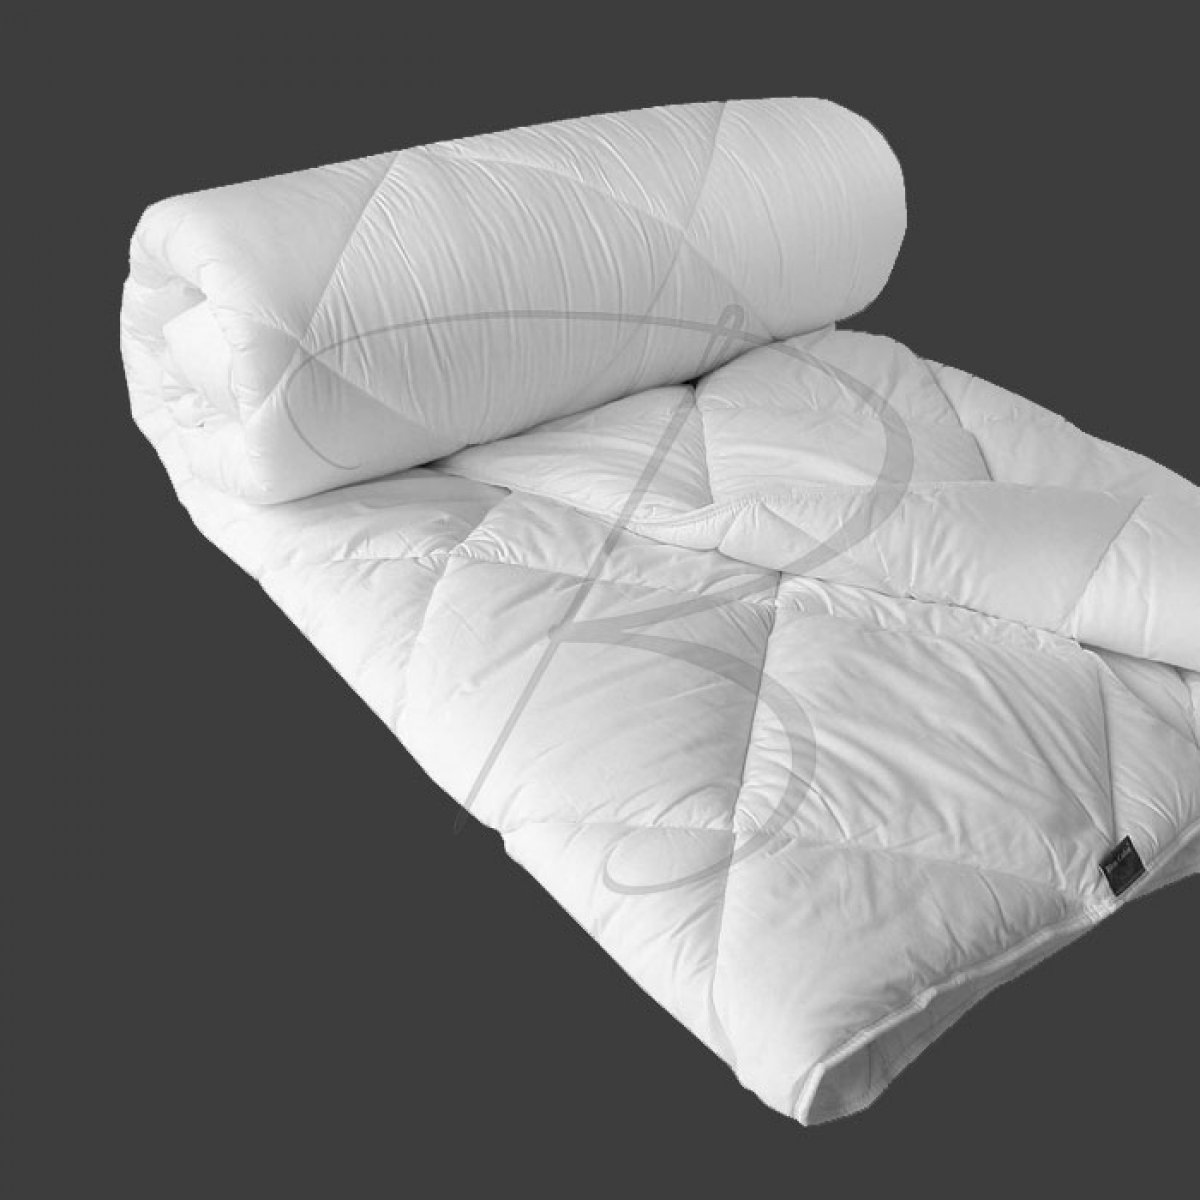 Pyrenees synthetic comforter - 350g/m² - 160 x 220